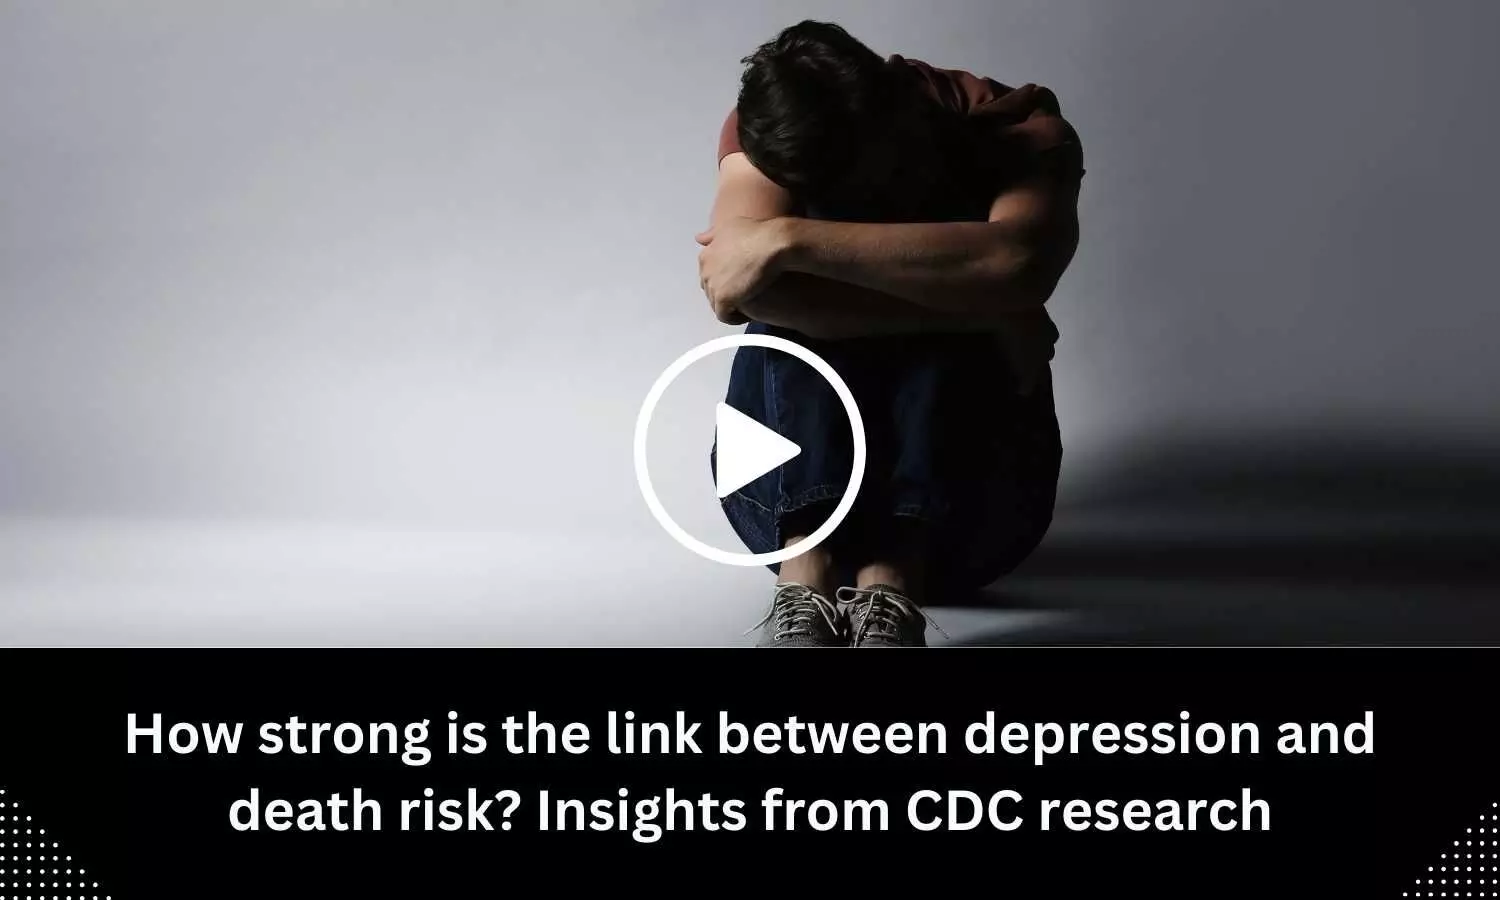 How strong is the link between depression and death risk? Insights from CDC research